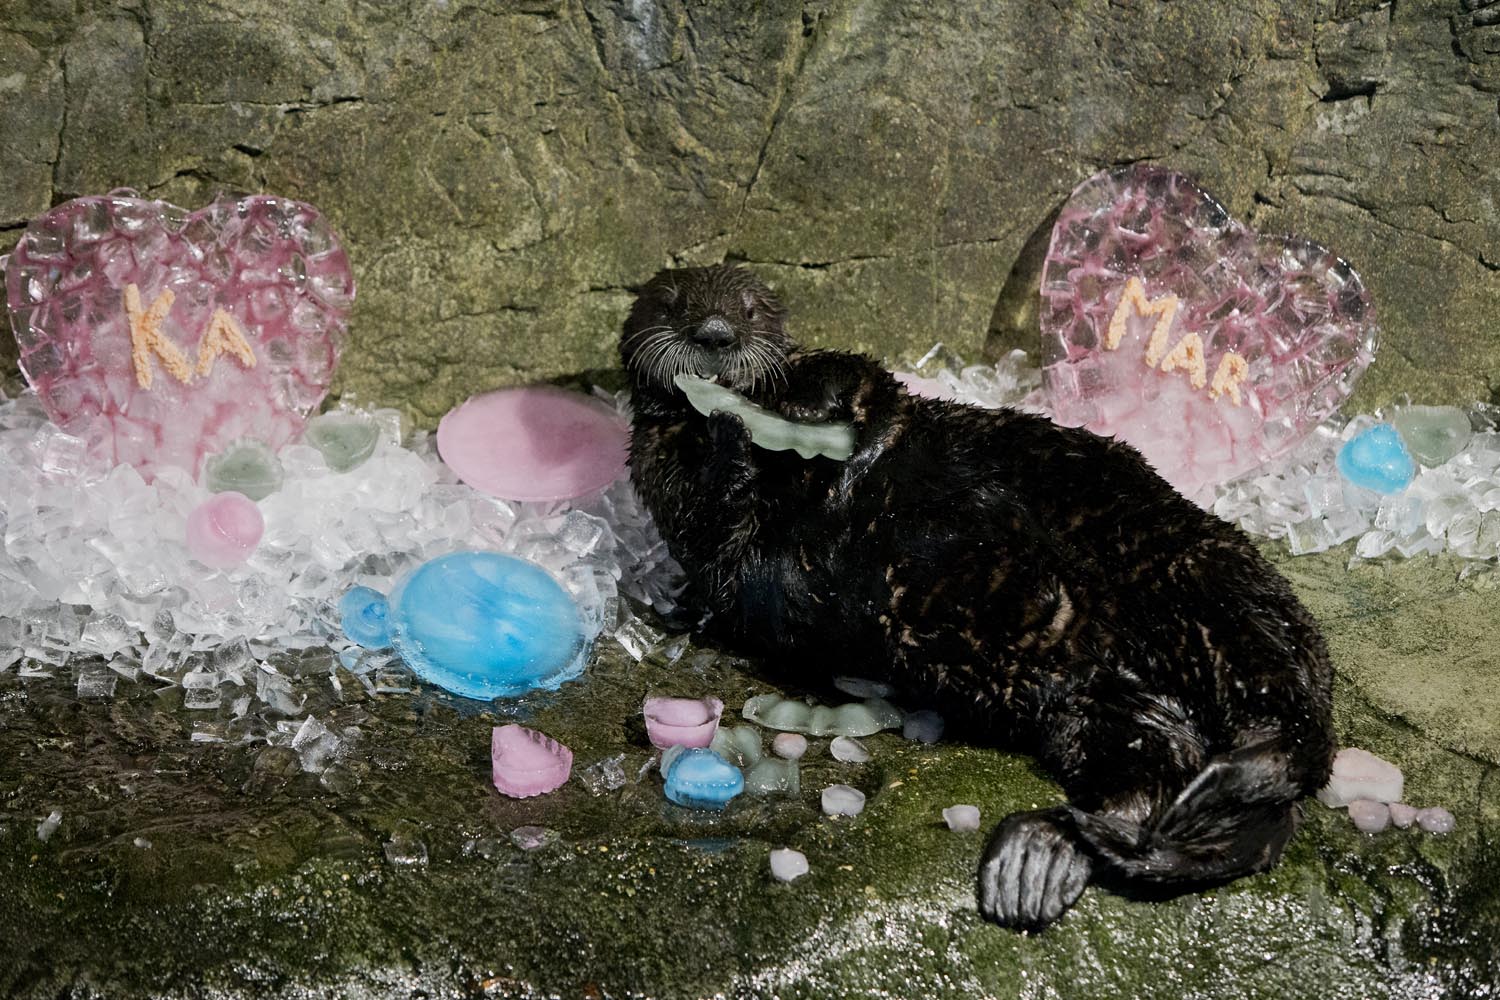 Shedd Aquarium's Otters Celebrate Valentine's Day with Icy Treats and More 4